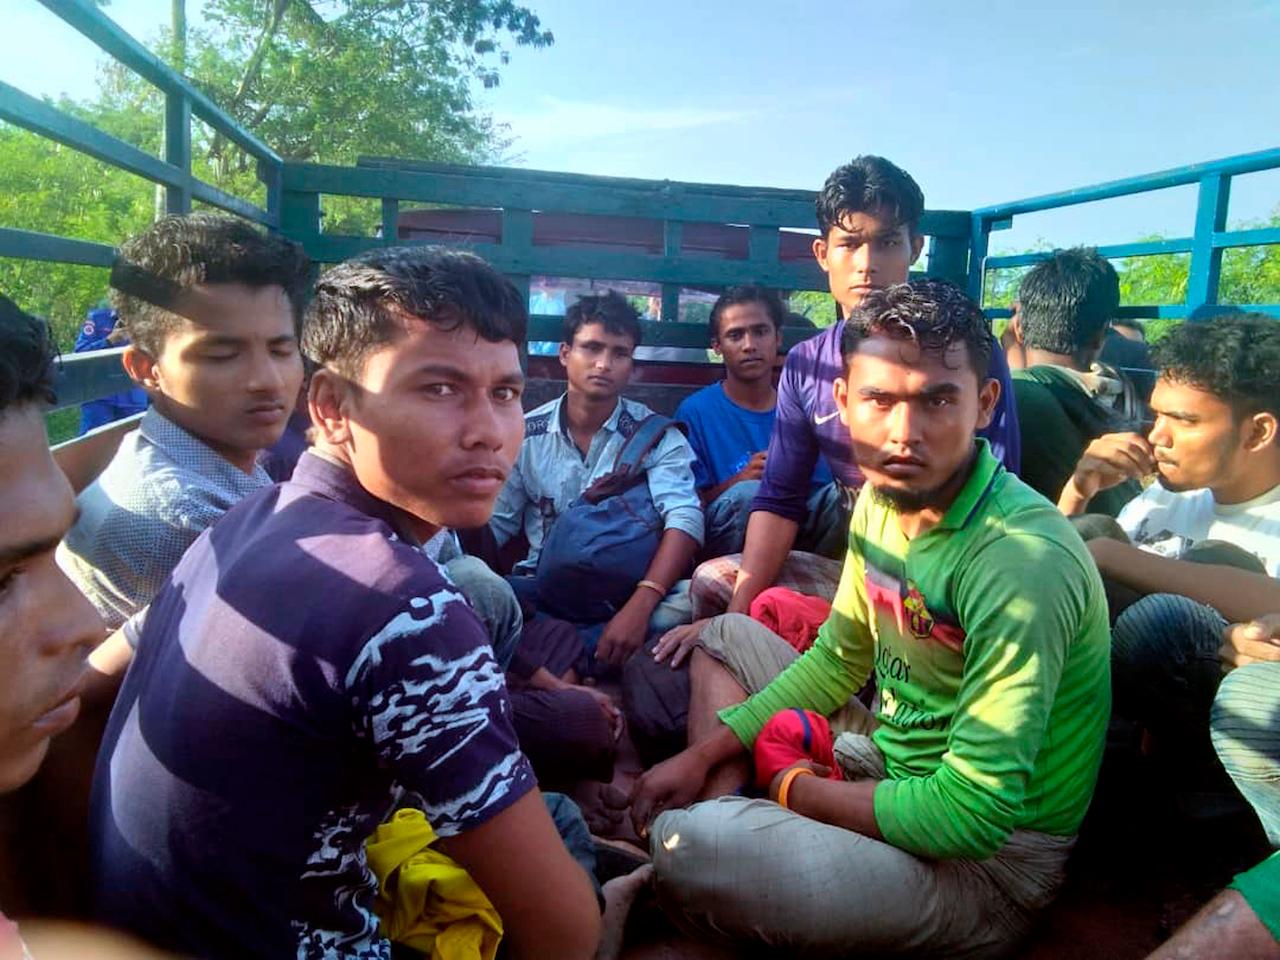 Dozens of men believed to be Rohingya from Myanmar are brought by truck to a police station in Perlis in this photo released April 8, 2019. Malaysia's treatment of refugees and migrants re-entered the spotlight at the height of the movement control order last year. Photo: AP